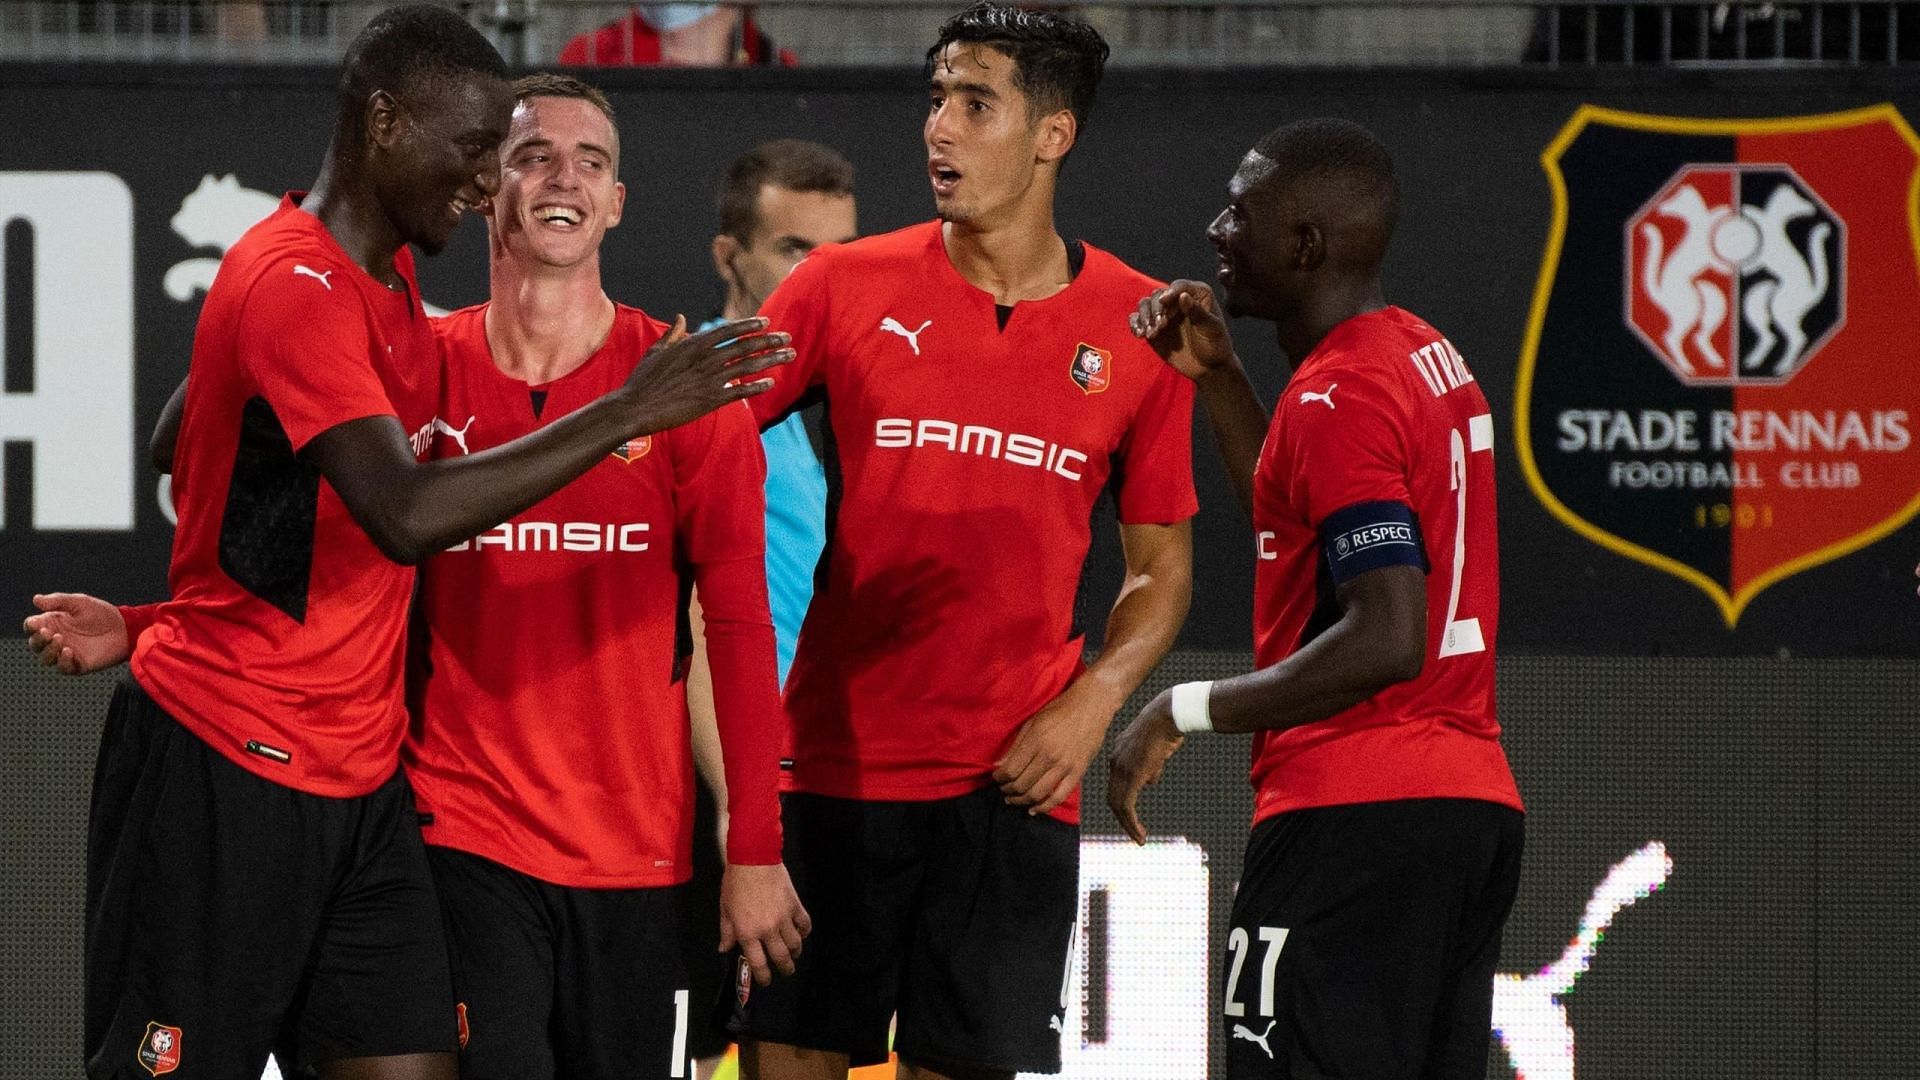 Stade Rennes face Mura in their UEFA Europa Conference League fixture on Thursday